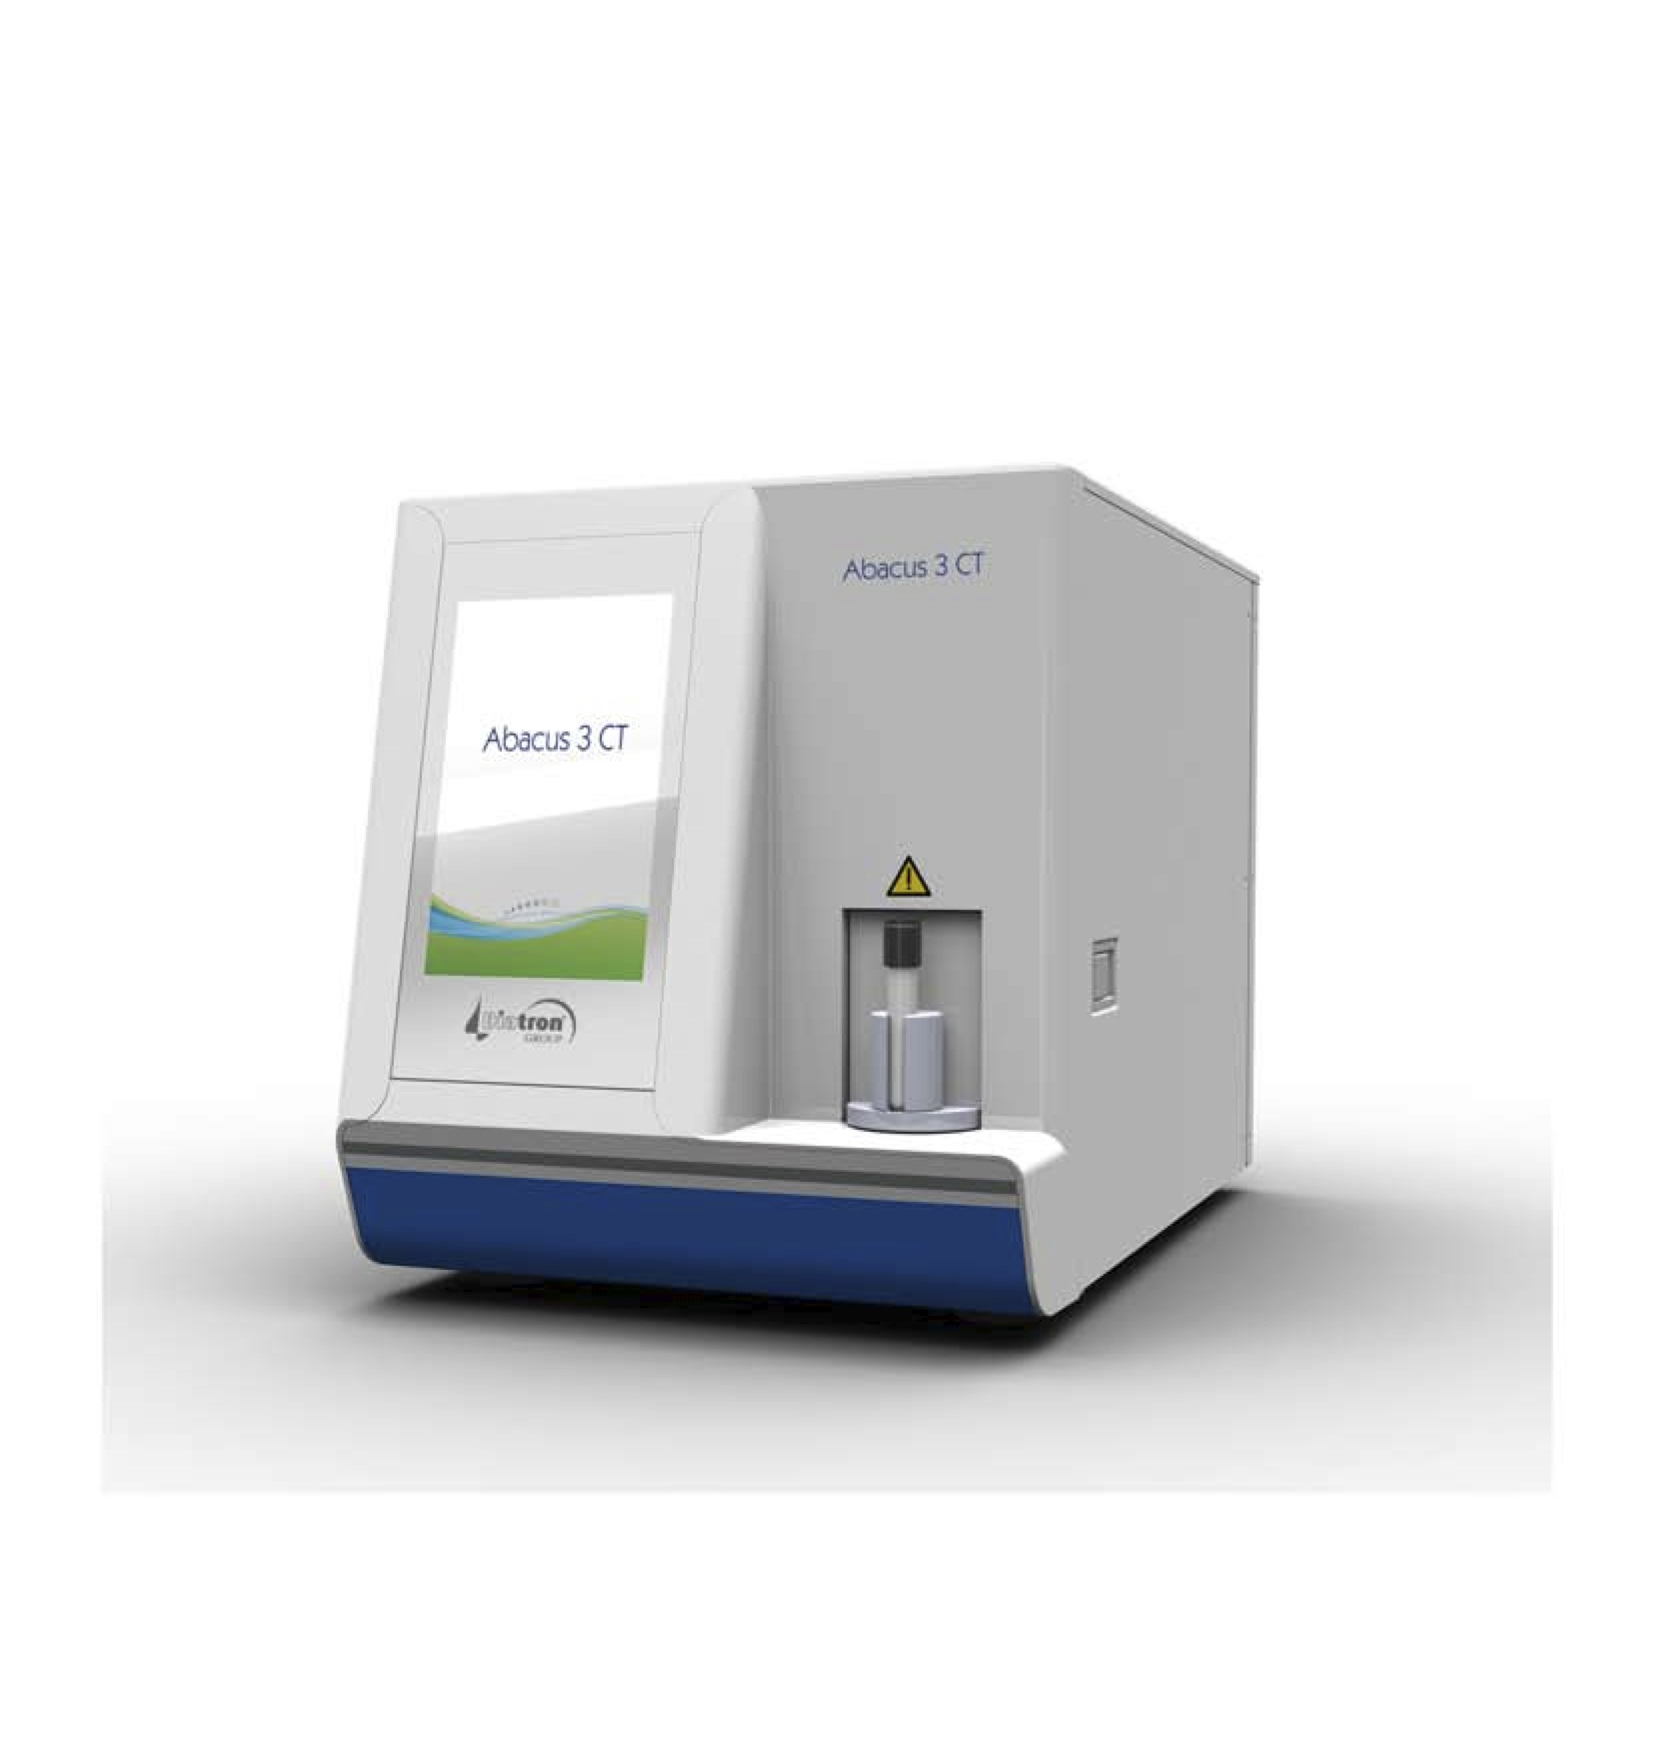 Image: The Abacus 3CT hematology analyzer, a compact, bench-top, flexible 3-part differential analyzer (Photo courtesy of the Diatron Group).